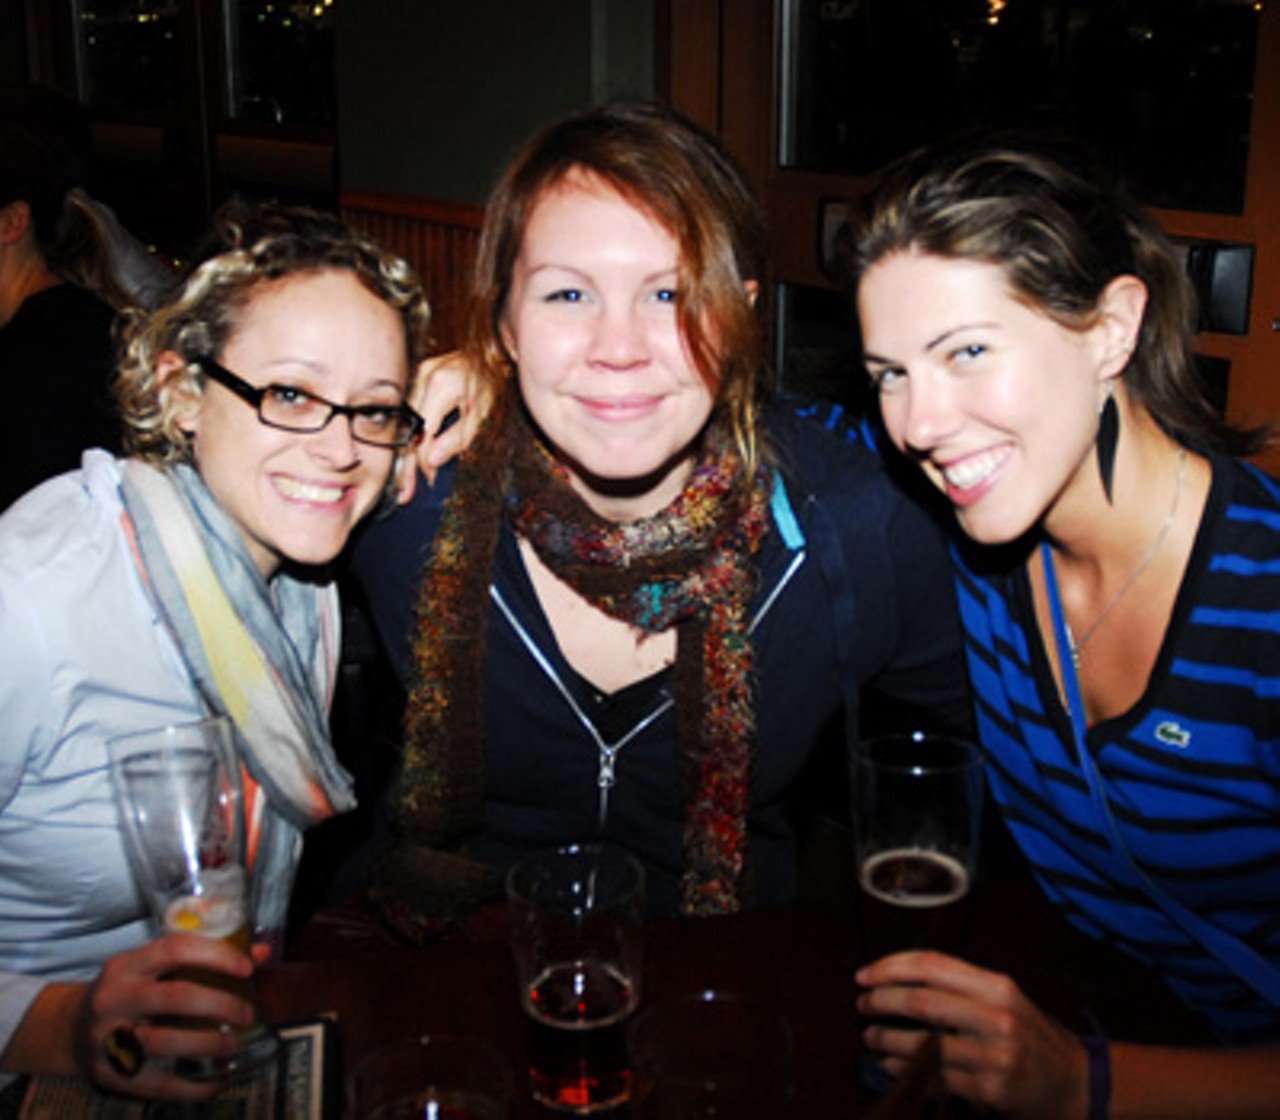 Sara Lynne Farmer, Meaghan Quinlan, Gretchen Rochoux on January 2 at the Schlafly Tap Room.